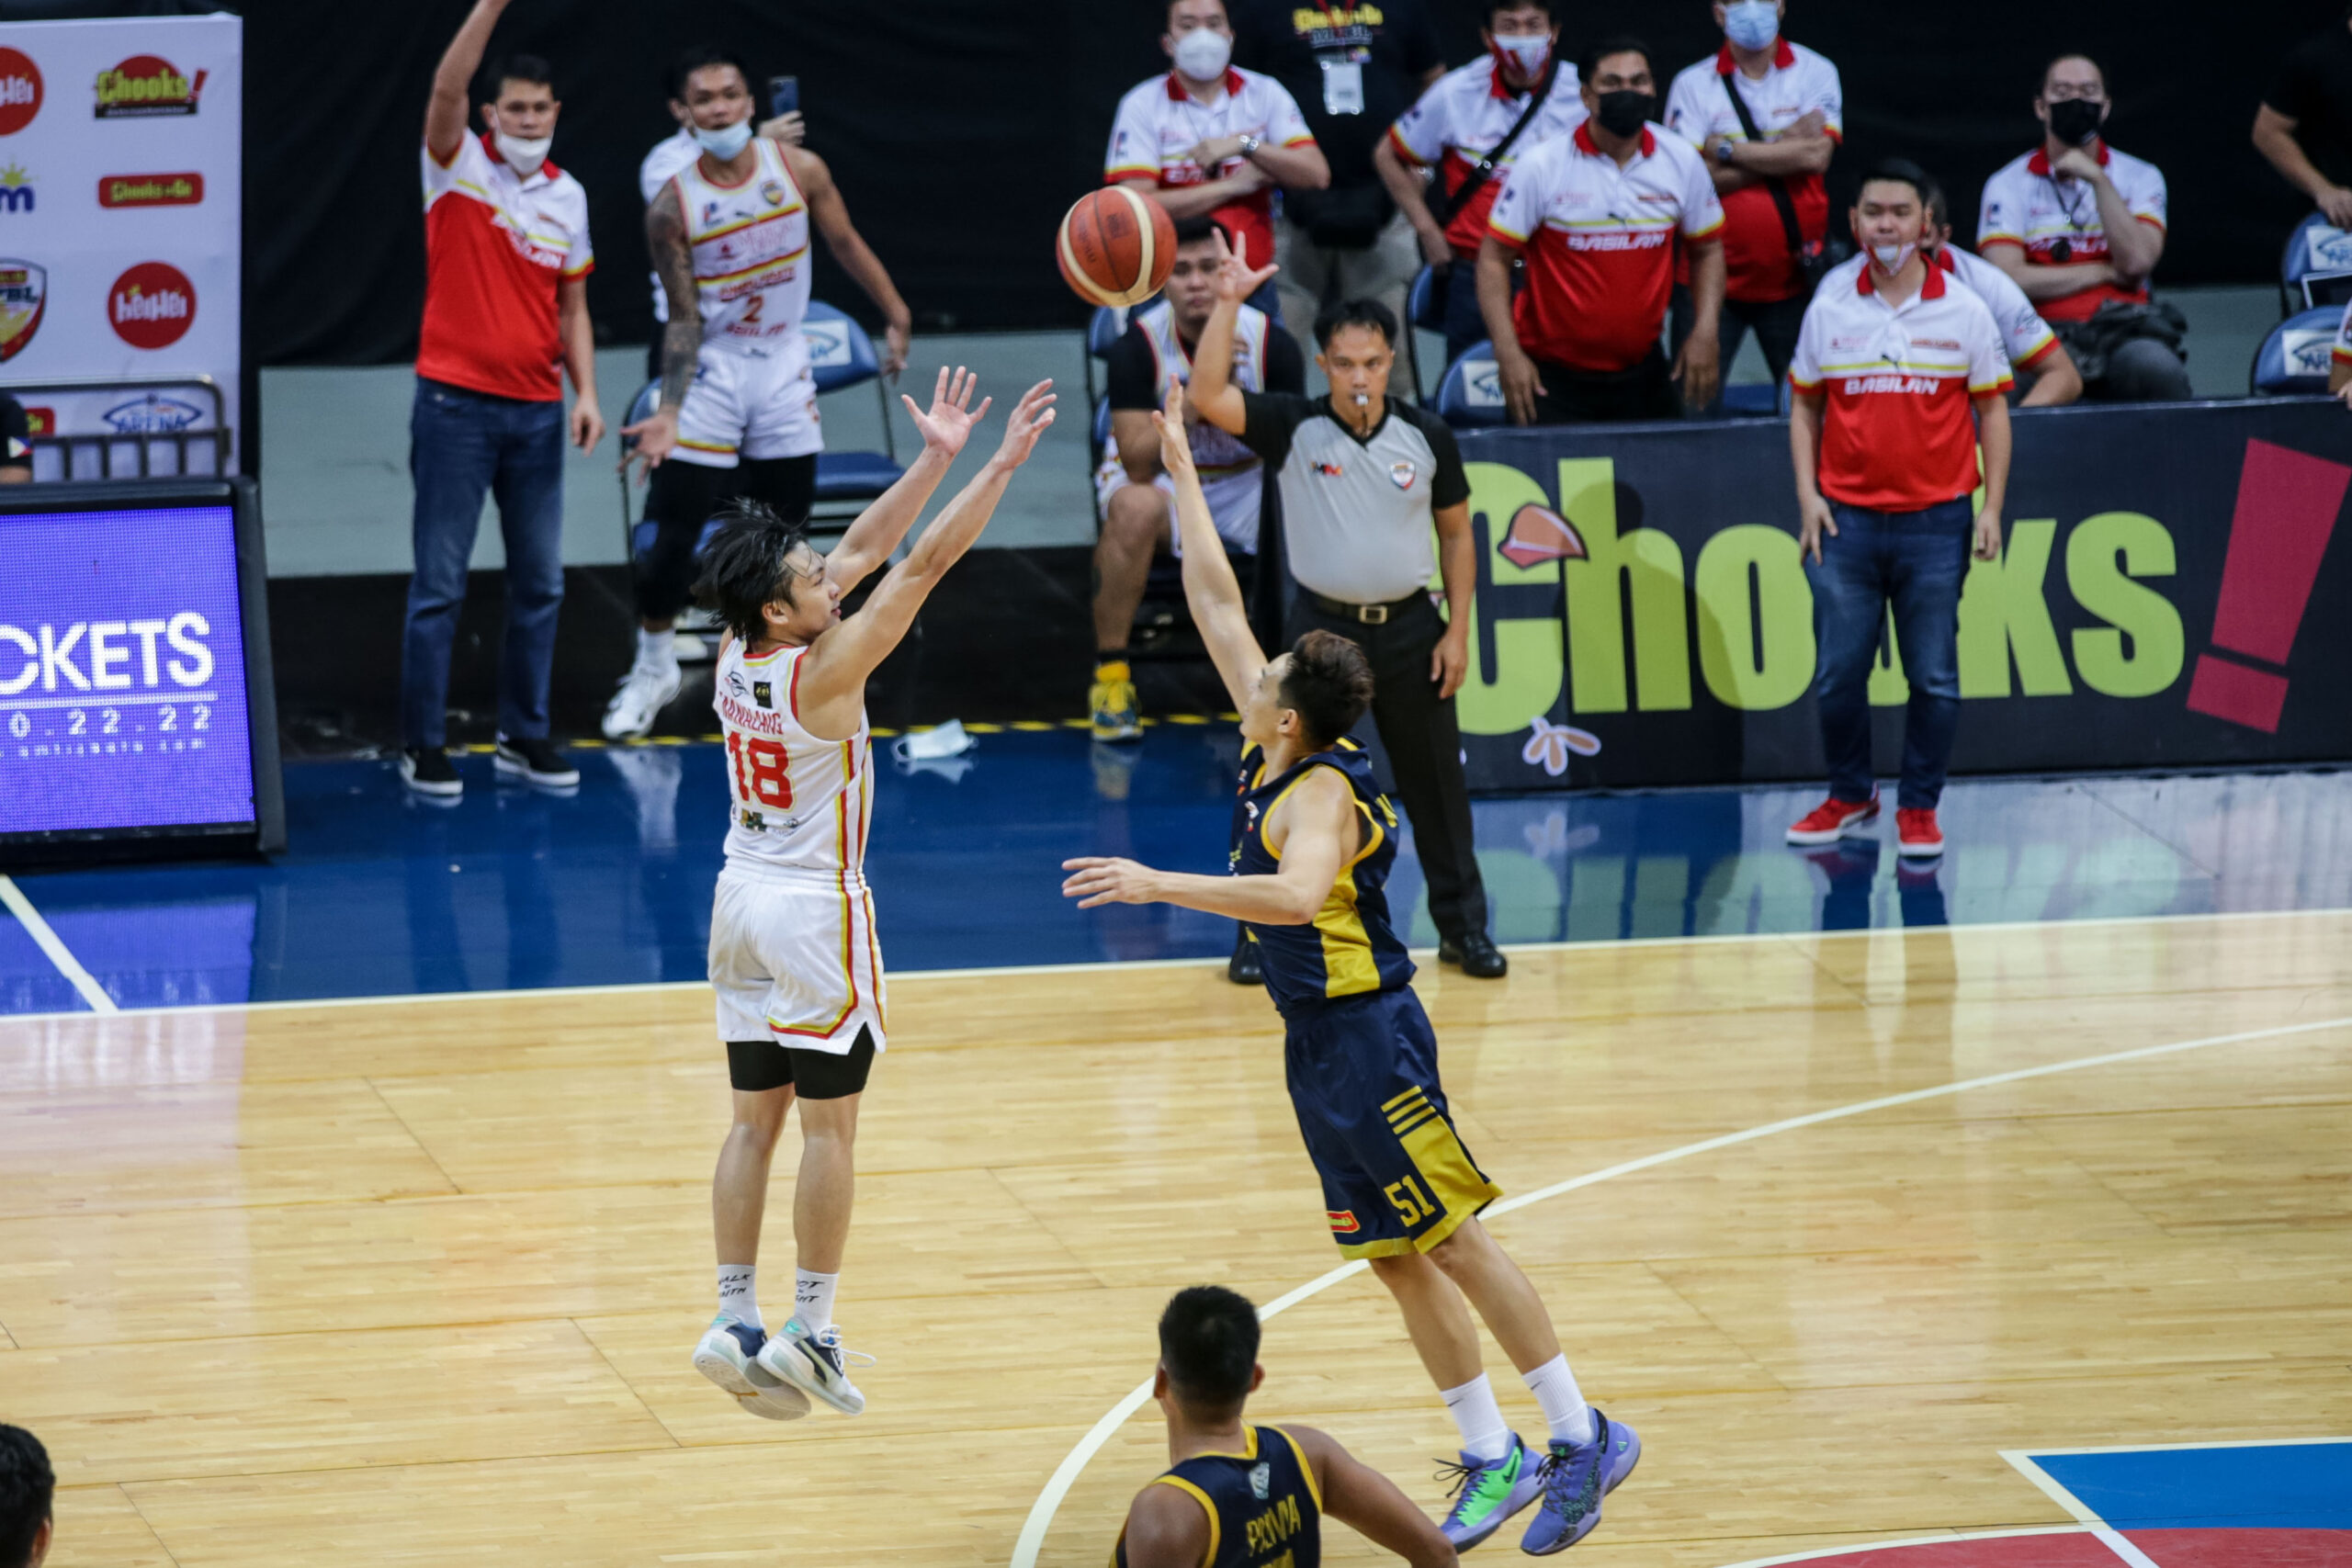 2021-Chooks-MPBL-Basilan-vs-Nueva-Ecija-Philip-Manalang-winner-scaled Manalang says 2M shot was destiny after what he went through in MPBL bubble Basketball MPBL News  - philippine sports news